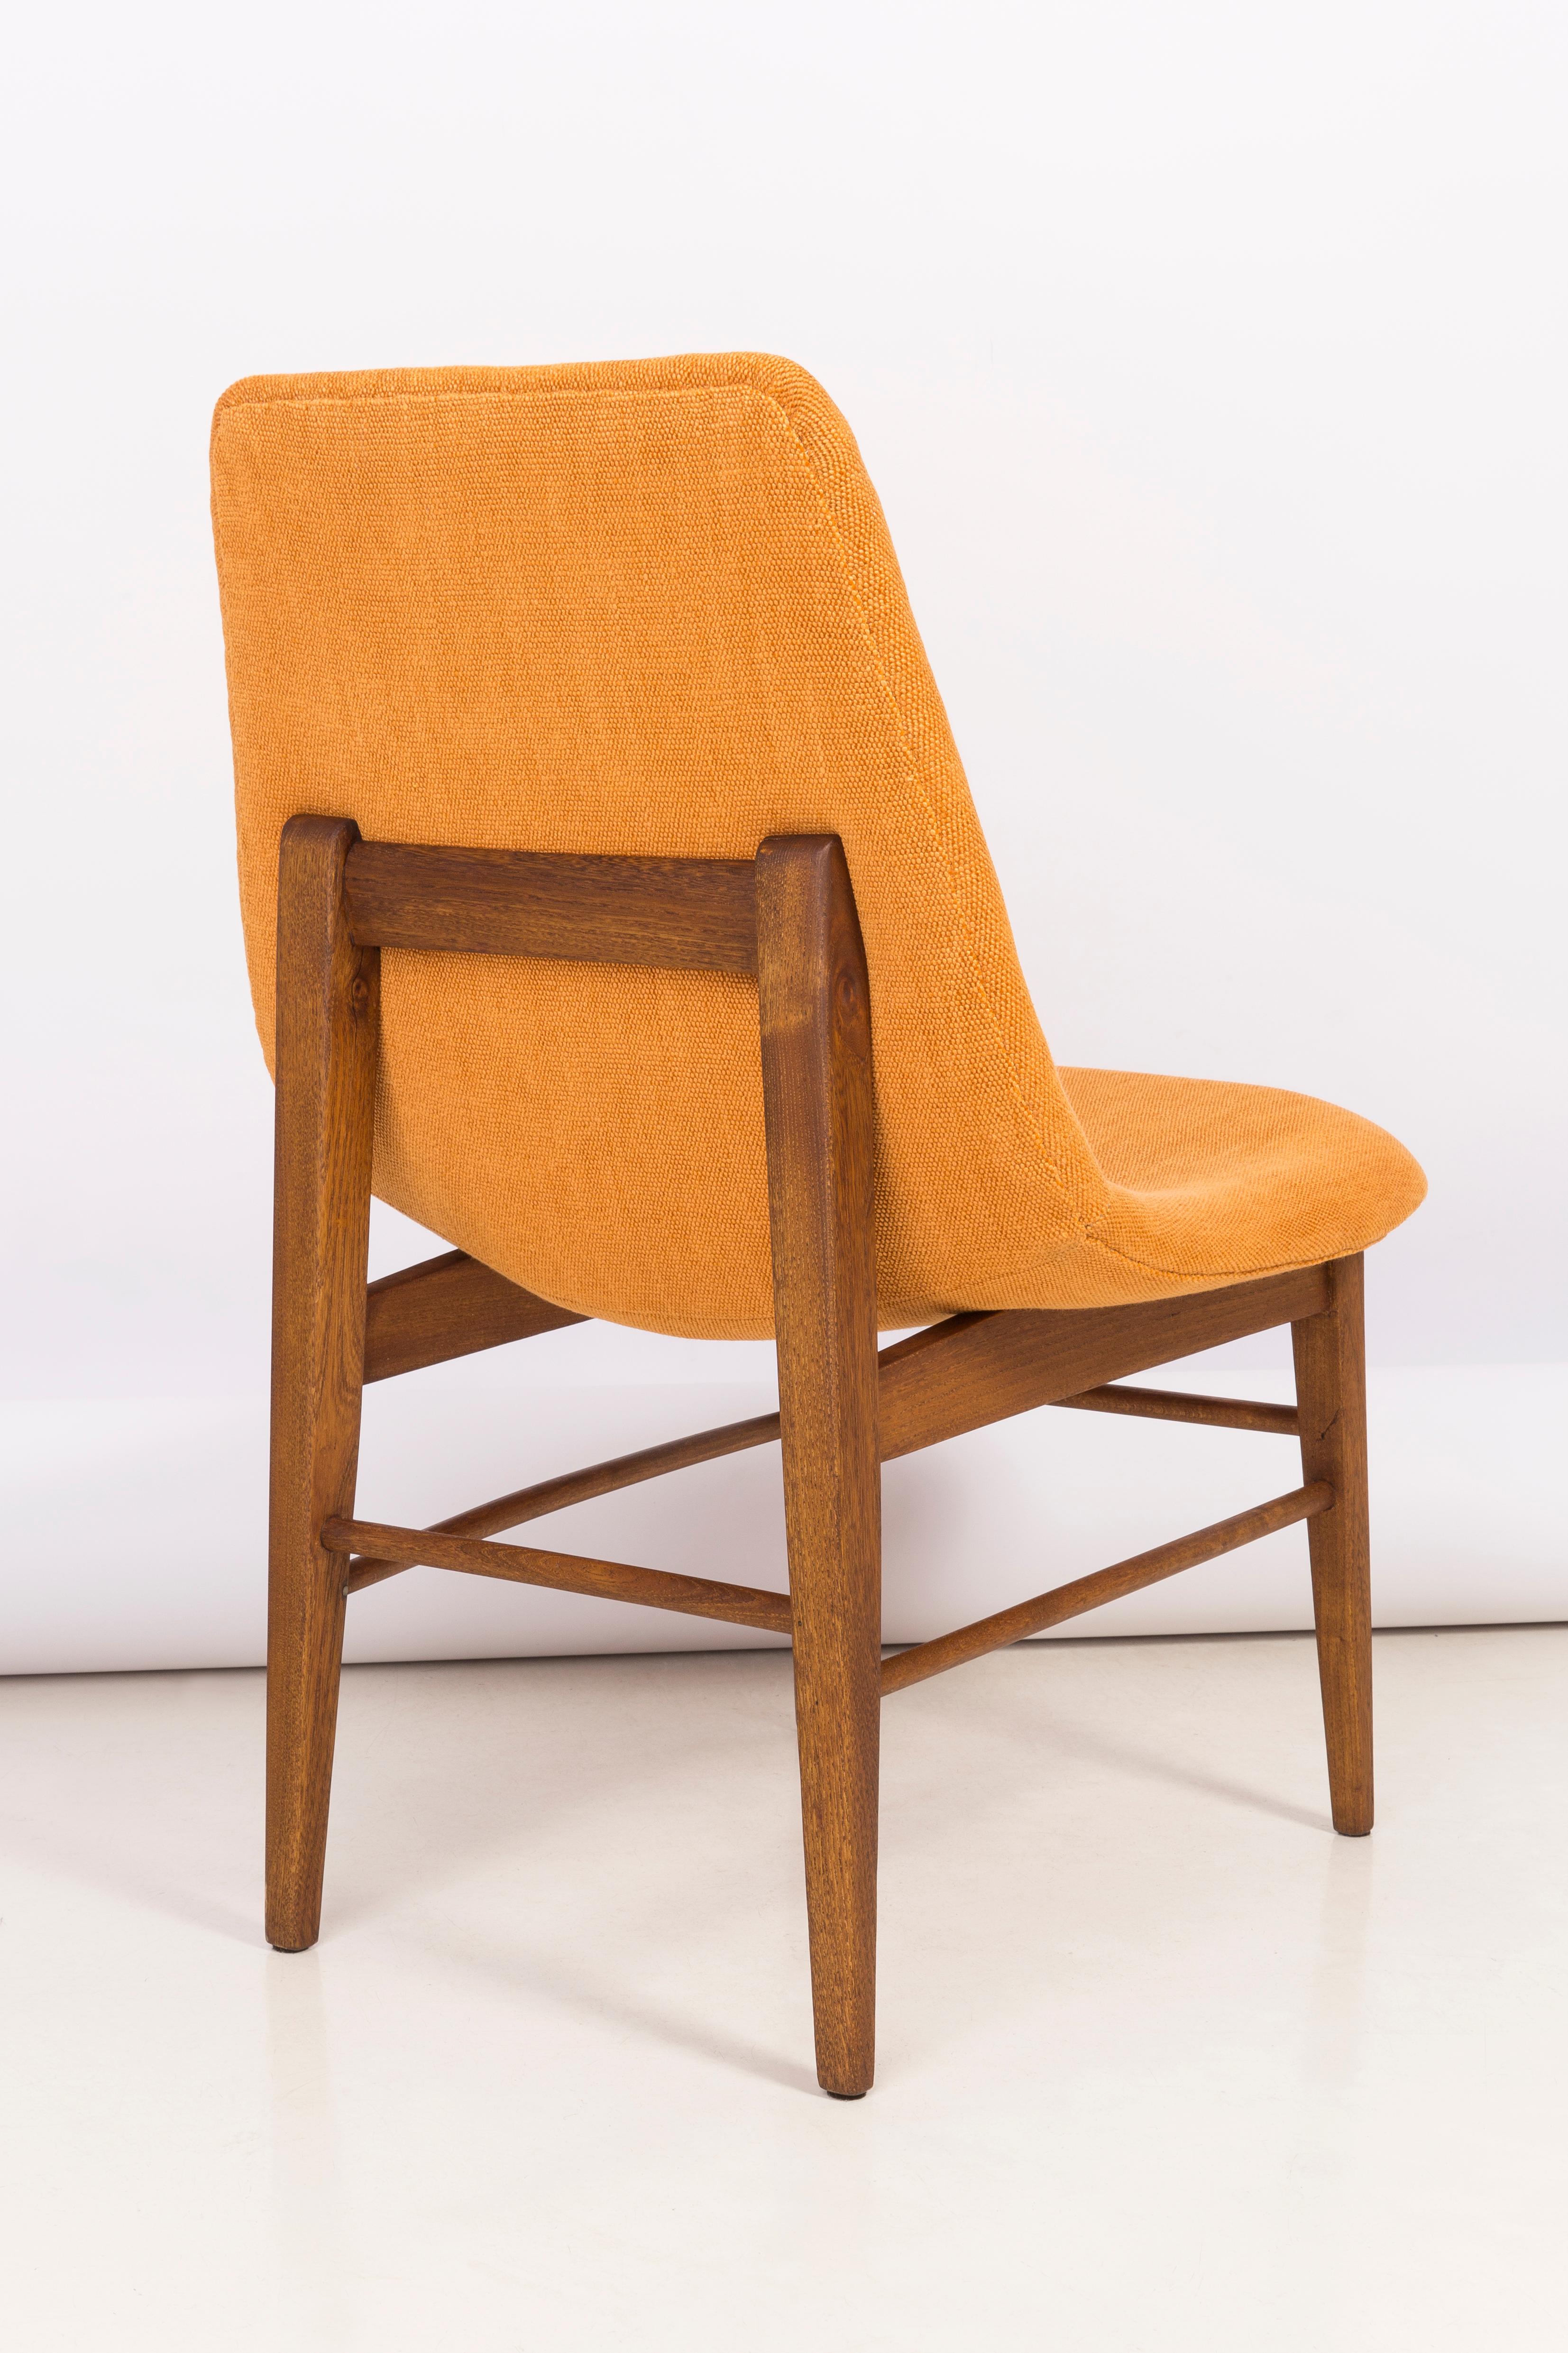 Textile Set of Two Rare 20th Century Orange Shell Chairs, H. Lachert, 1960s For Sale